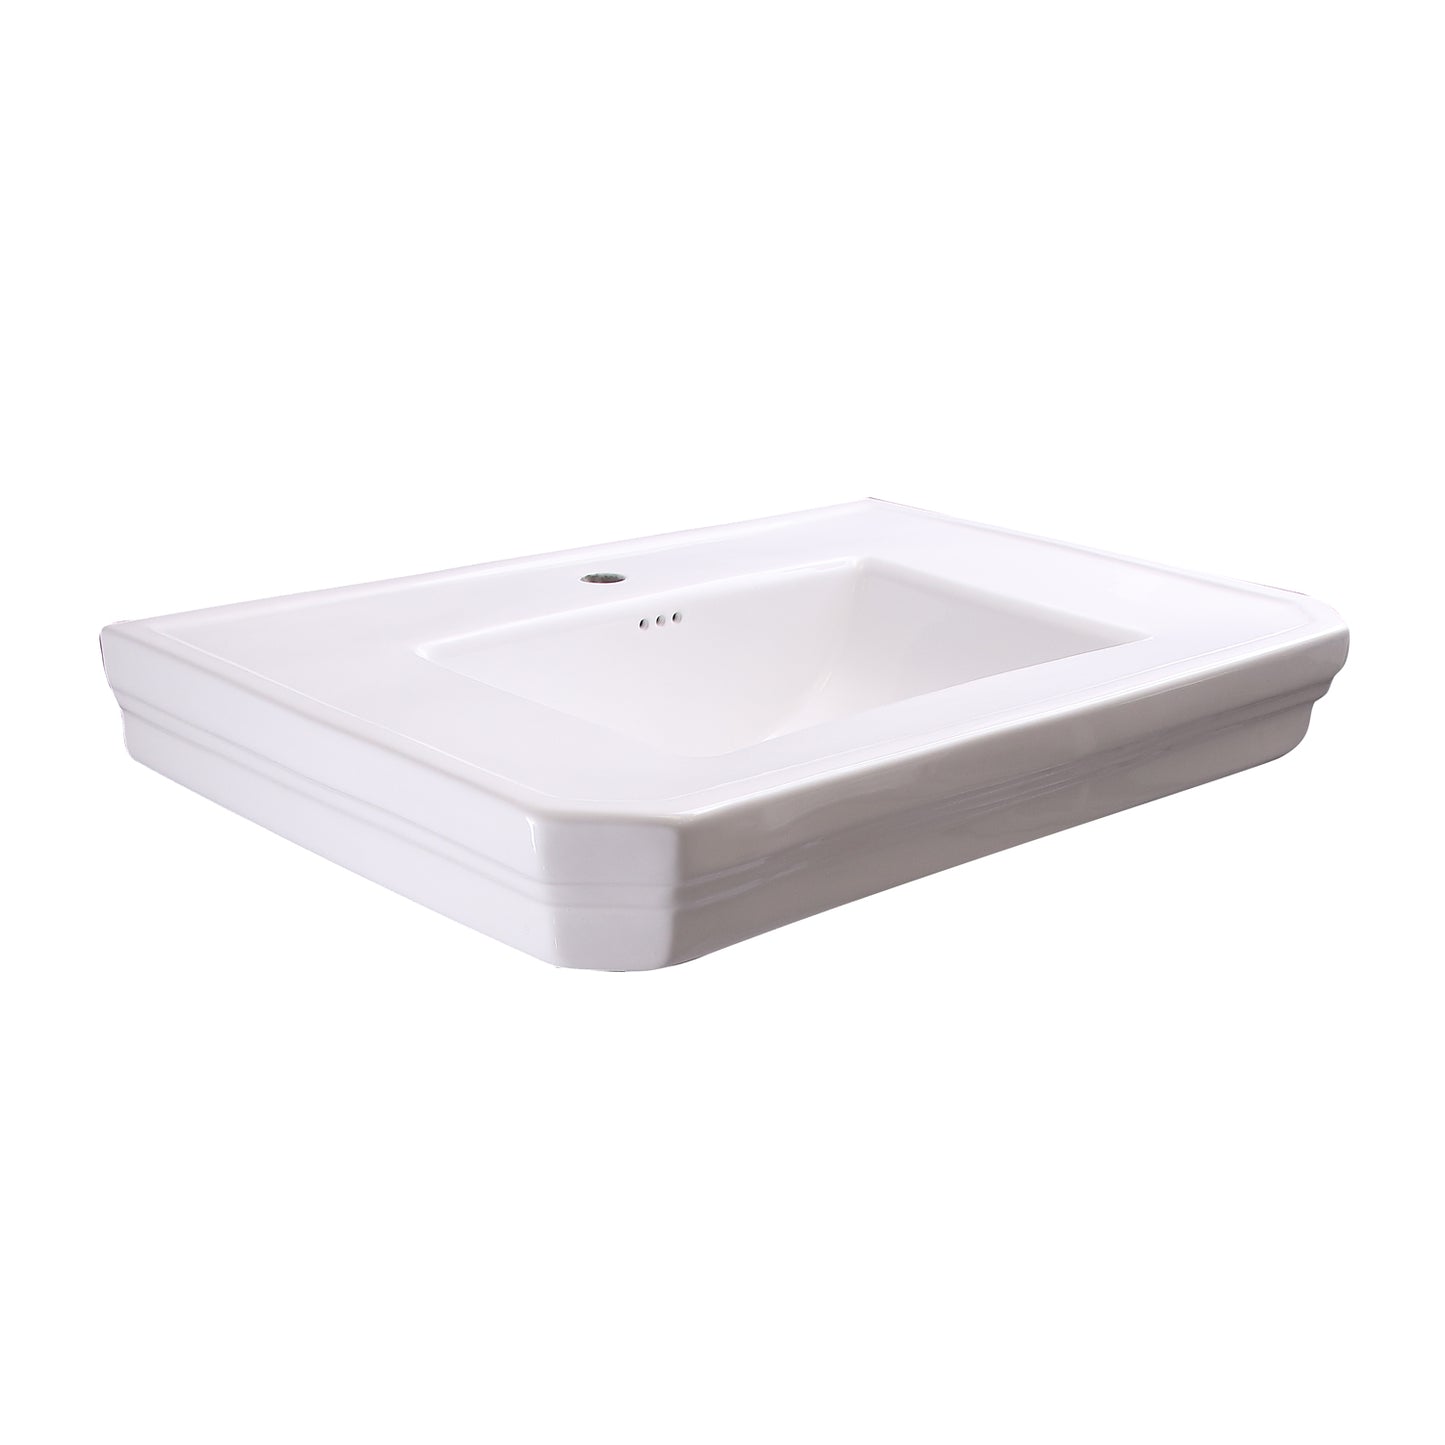 Corbin Wall Hung Rectangle Sink with 1 Faucet Hole and Overflow White